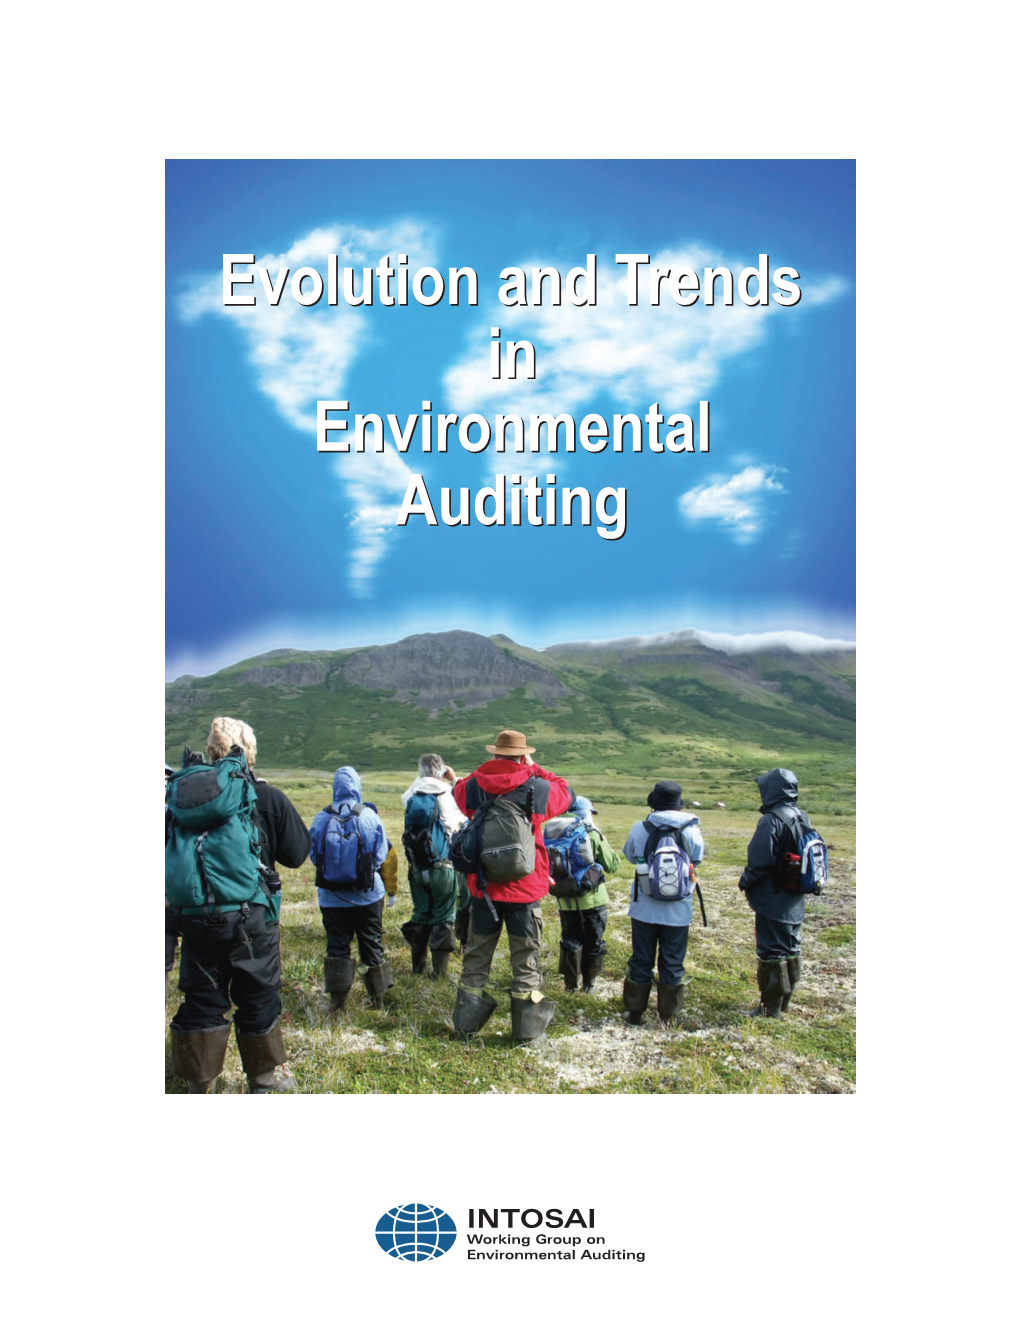 Evolution and Trends in Environmental Auditing